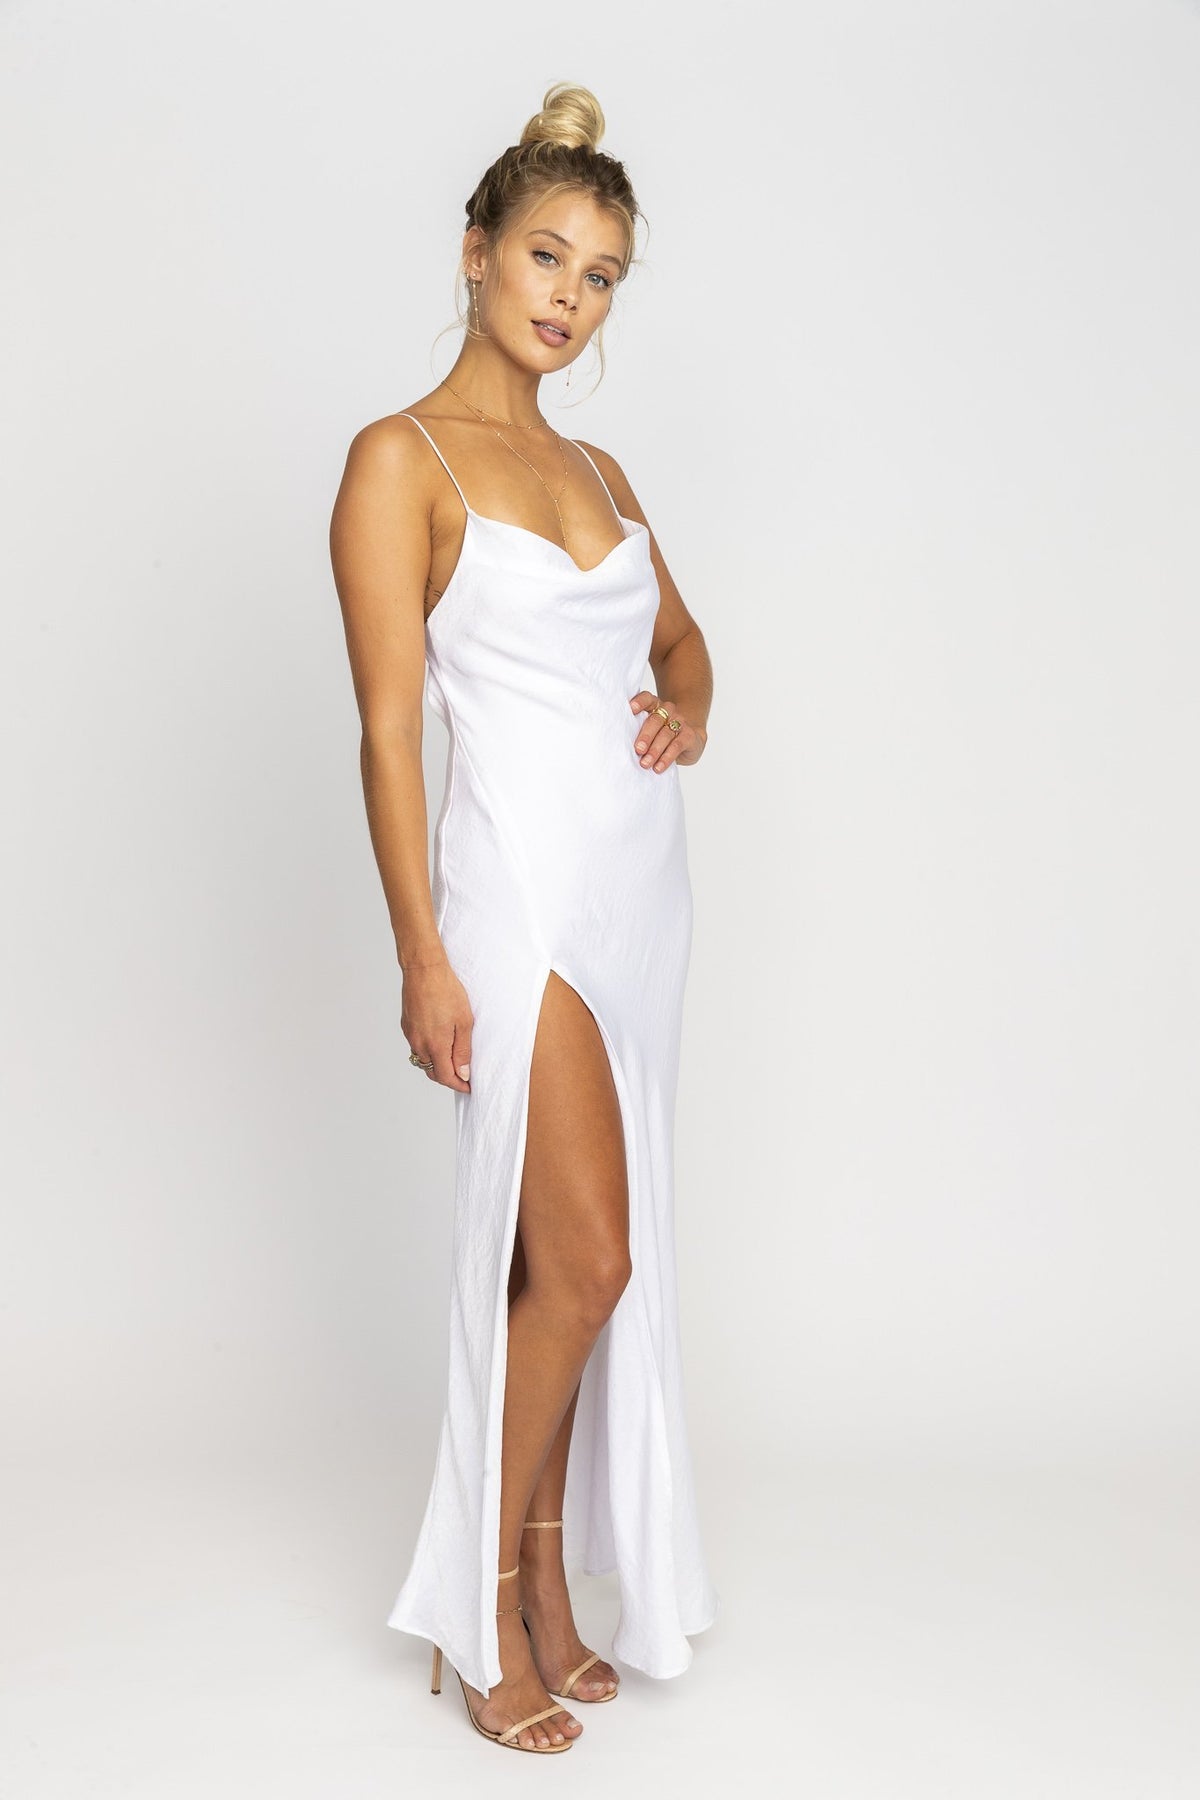 This is an image of River Slip - RESA featuring a model wearing the dress